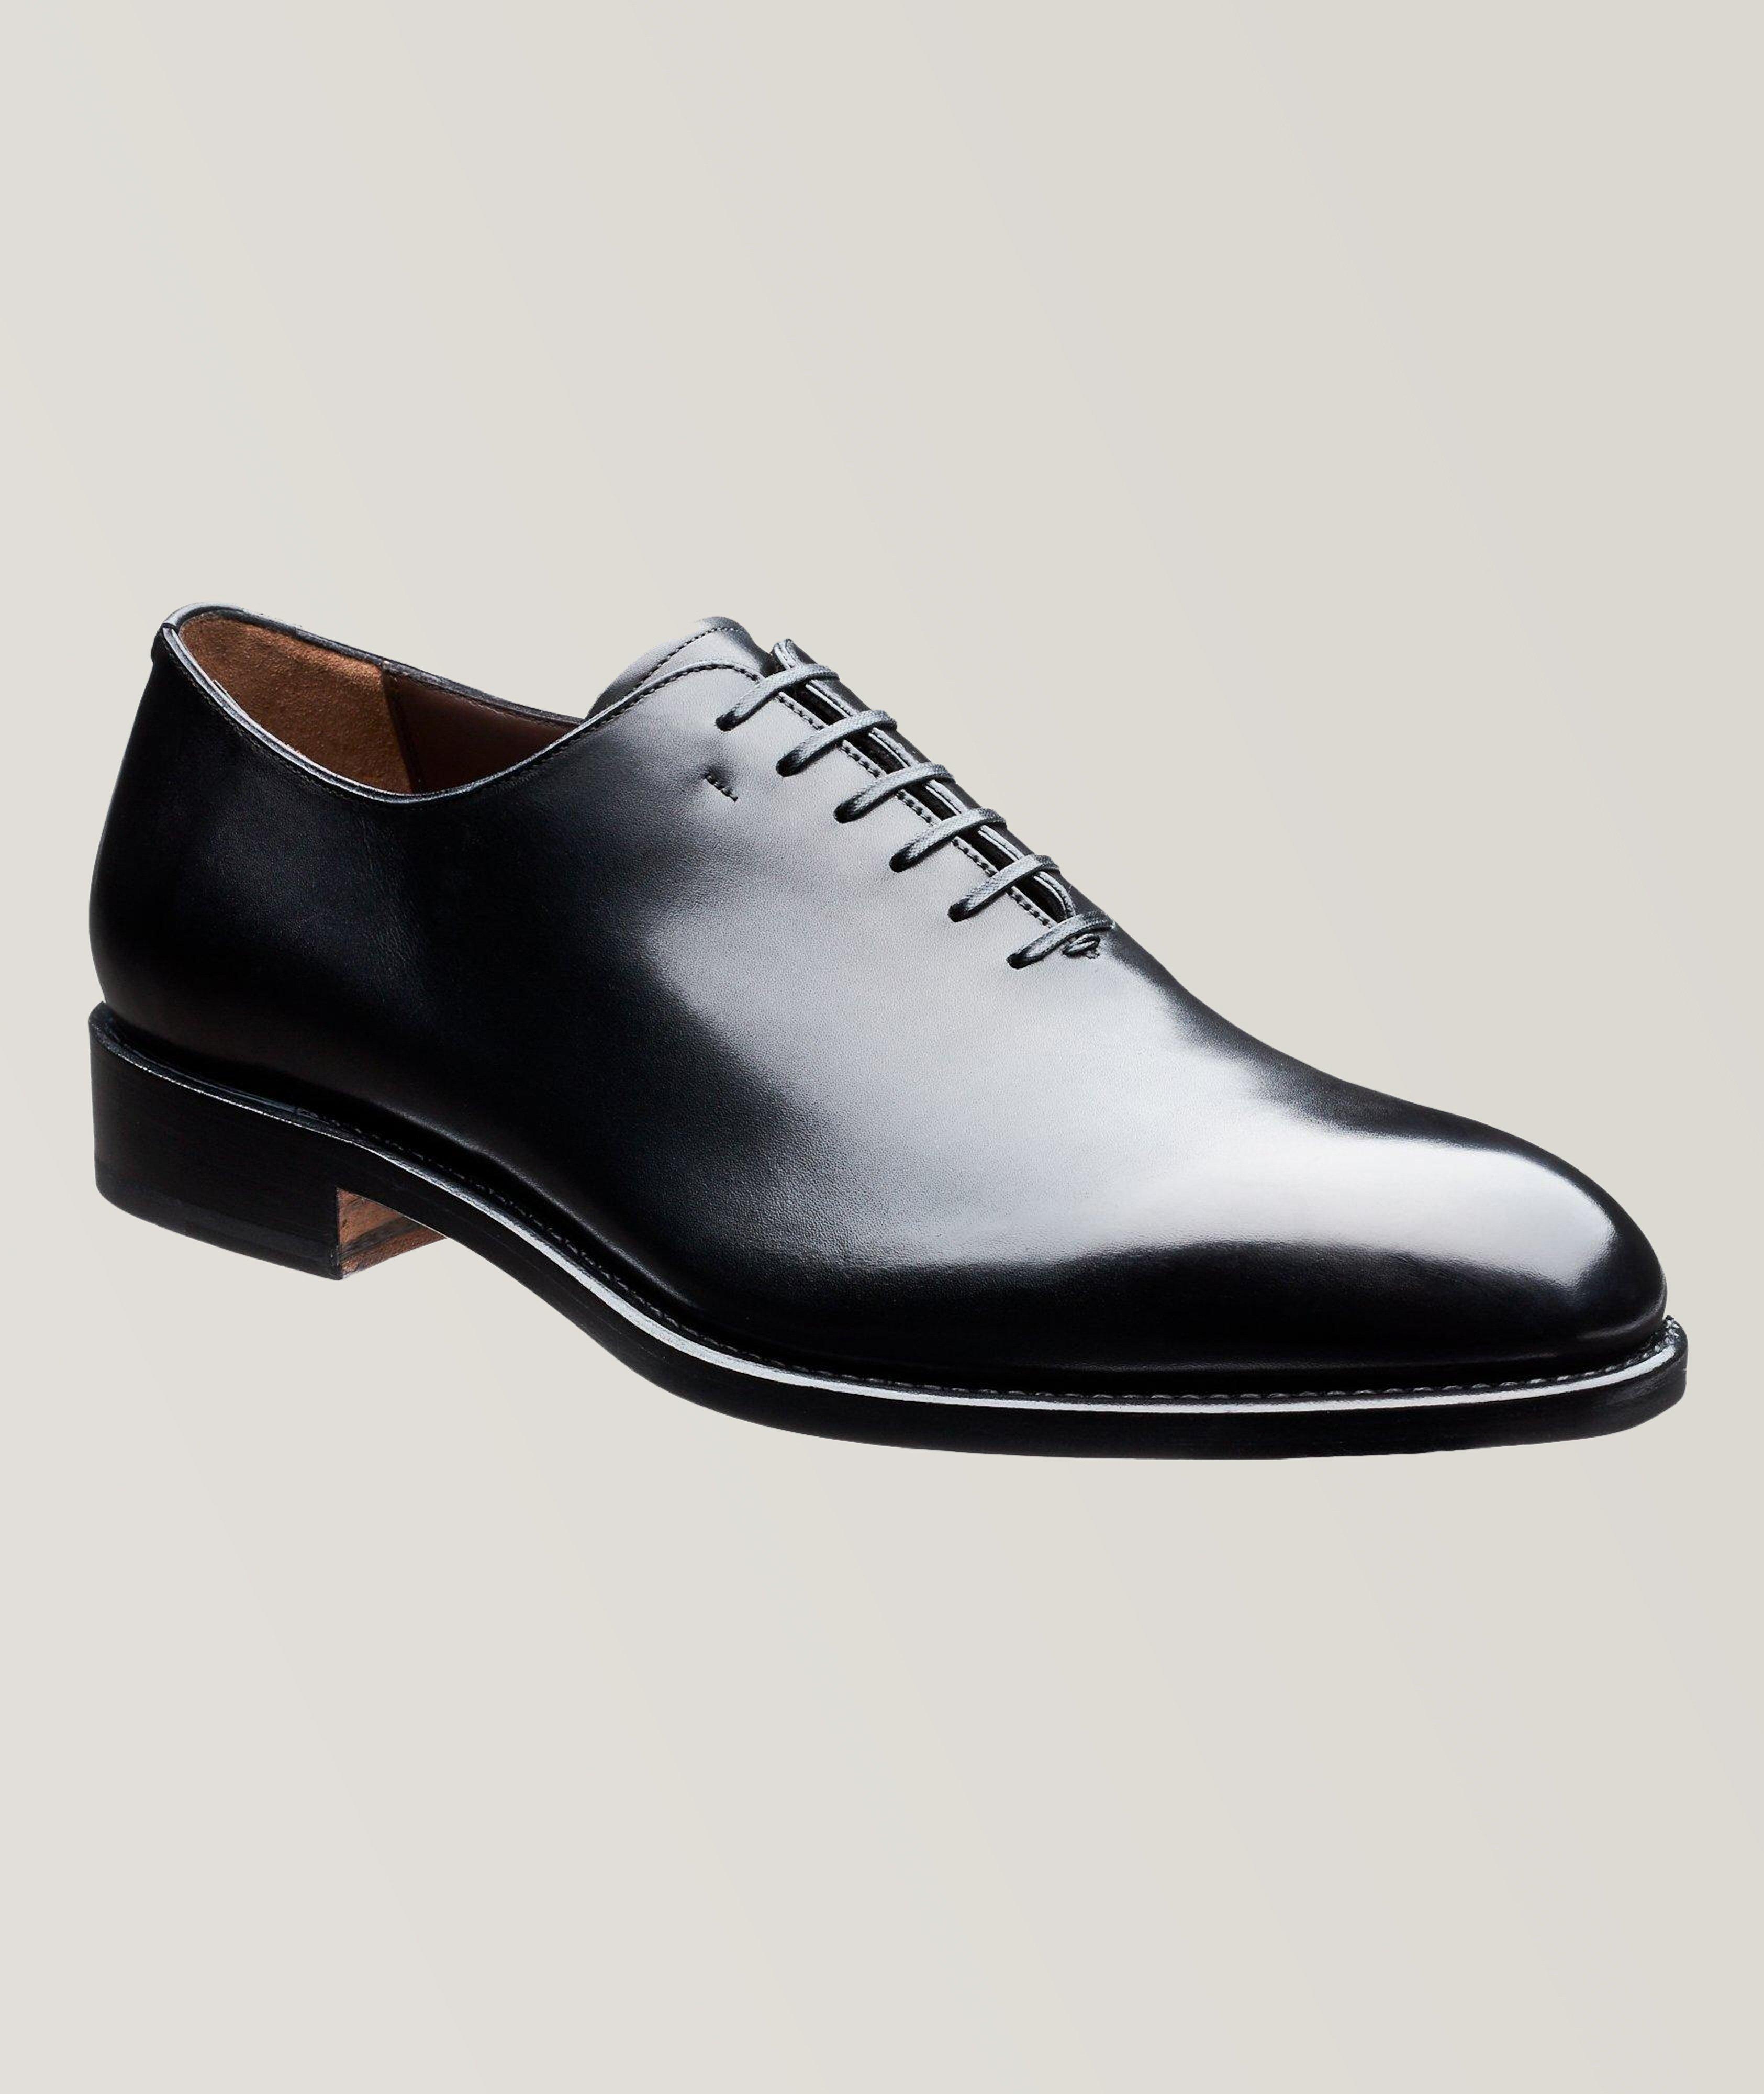 TORY  Patent Leather Whole Cut oxford – FOREMEN